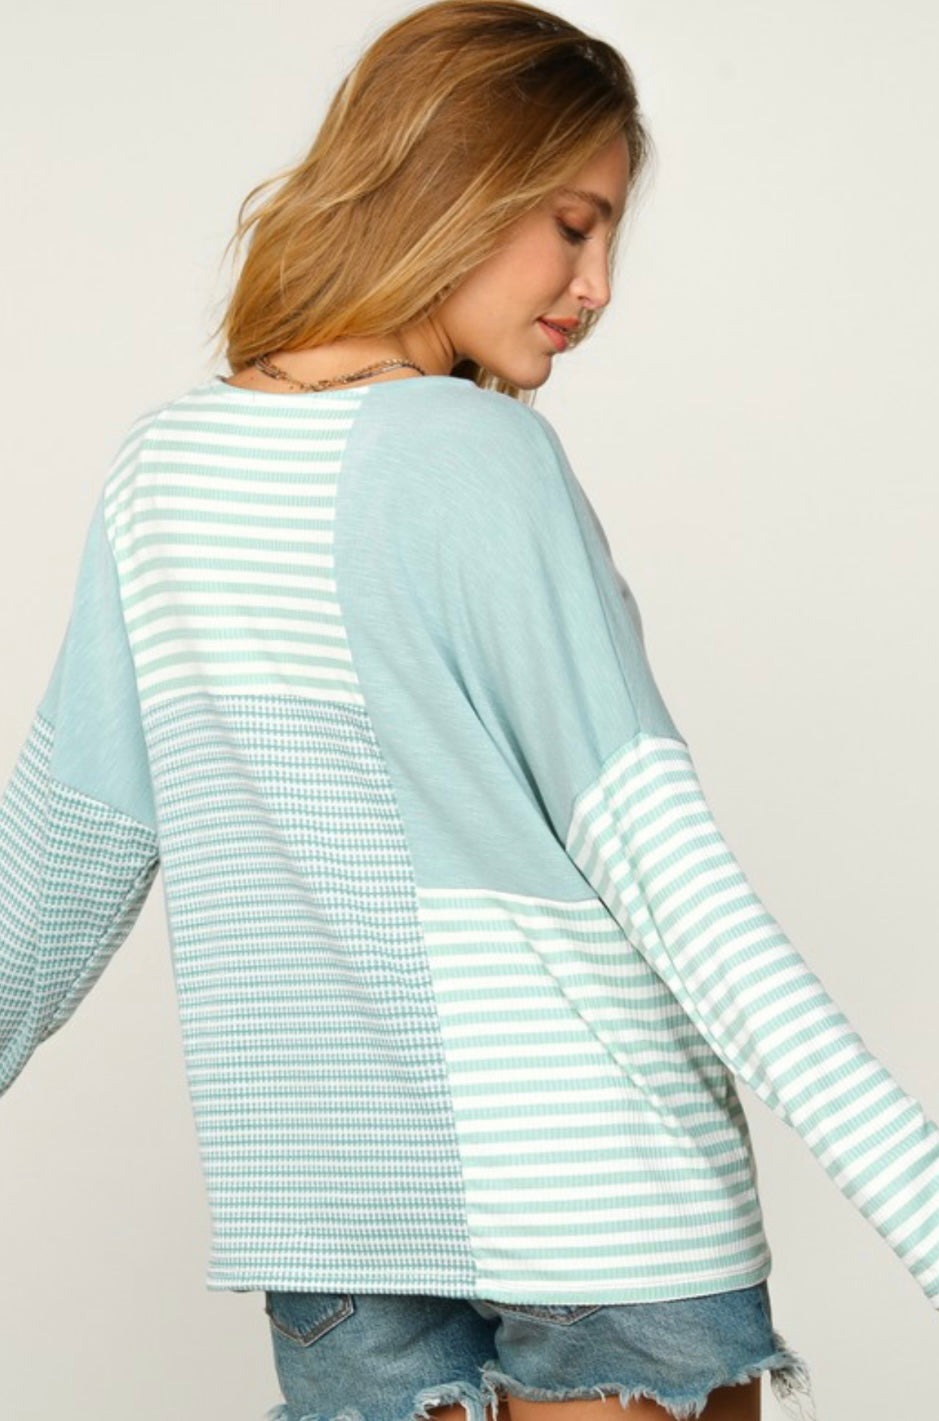 The Lucky One Mint Stripe Knit Top